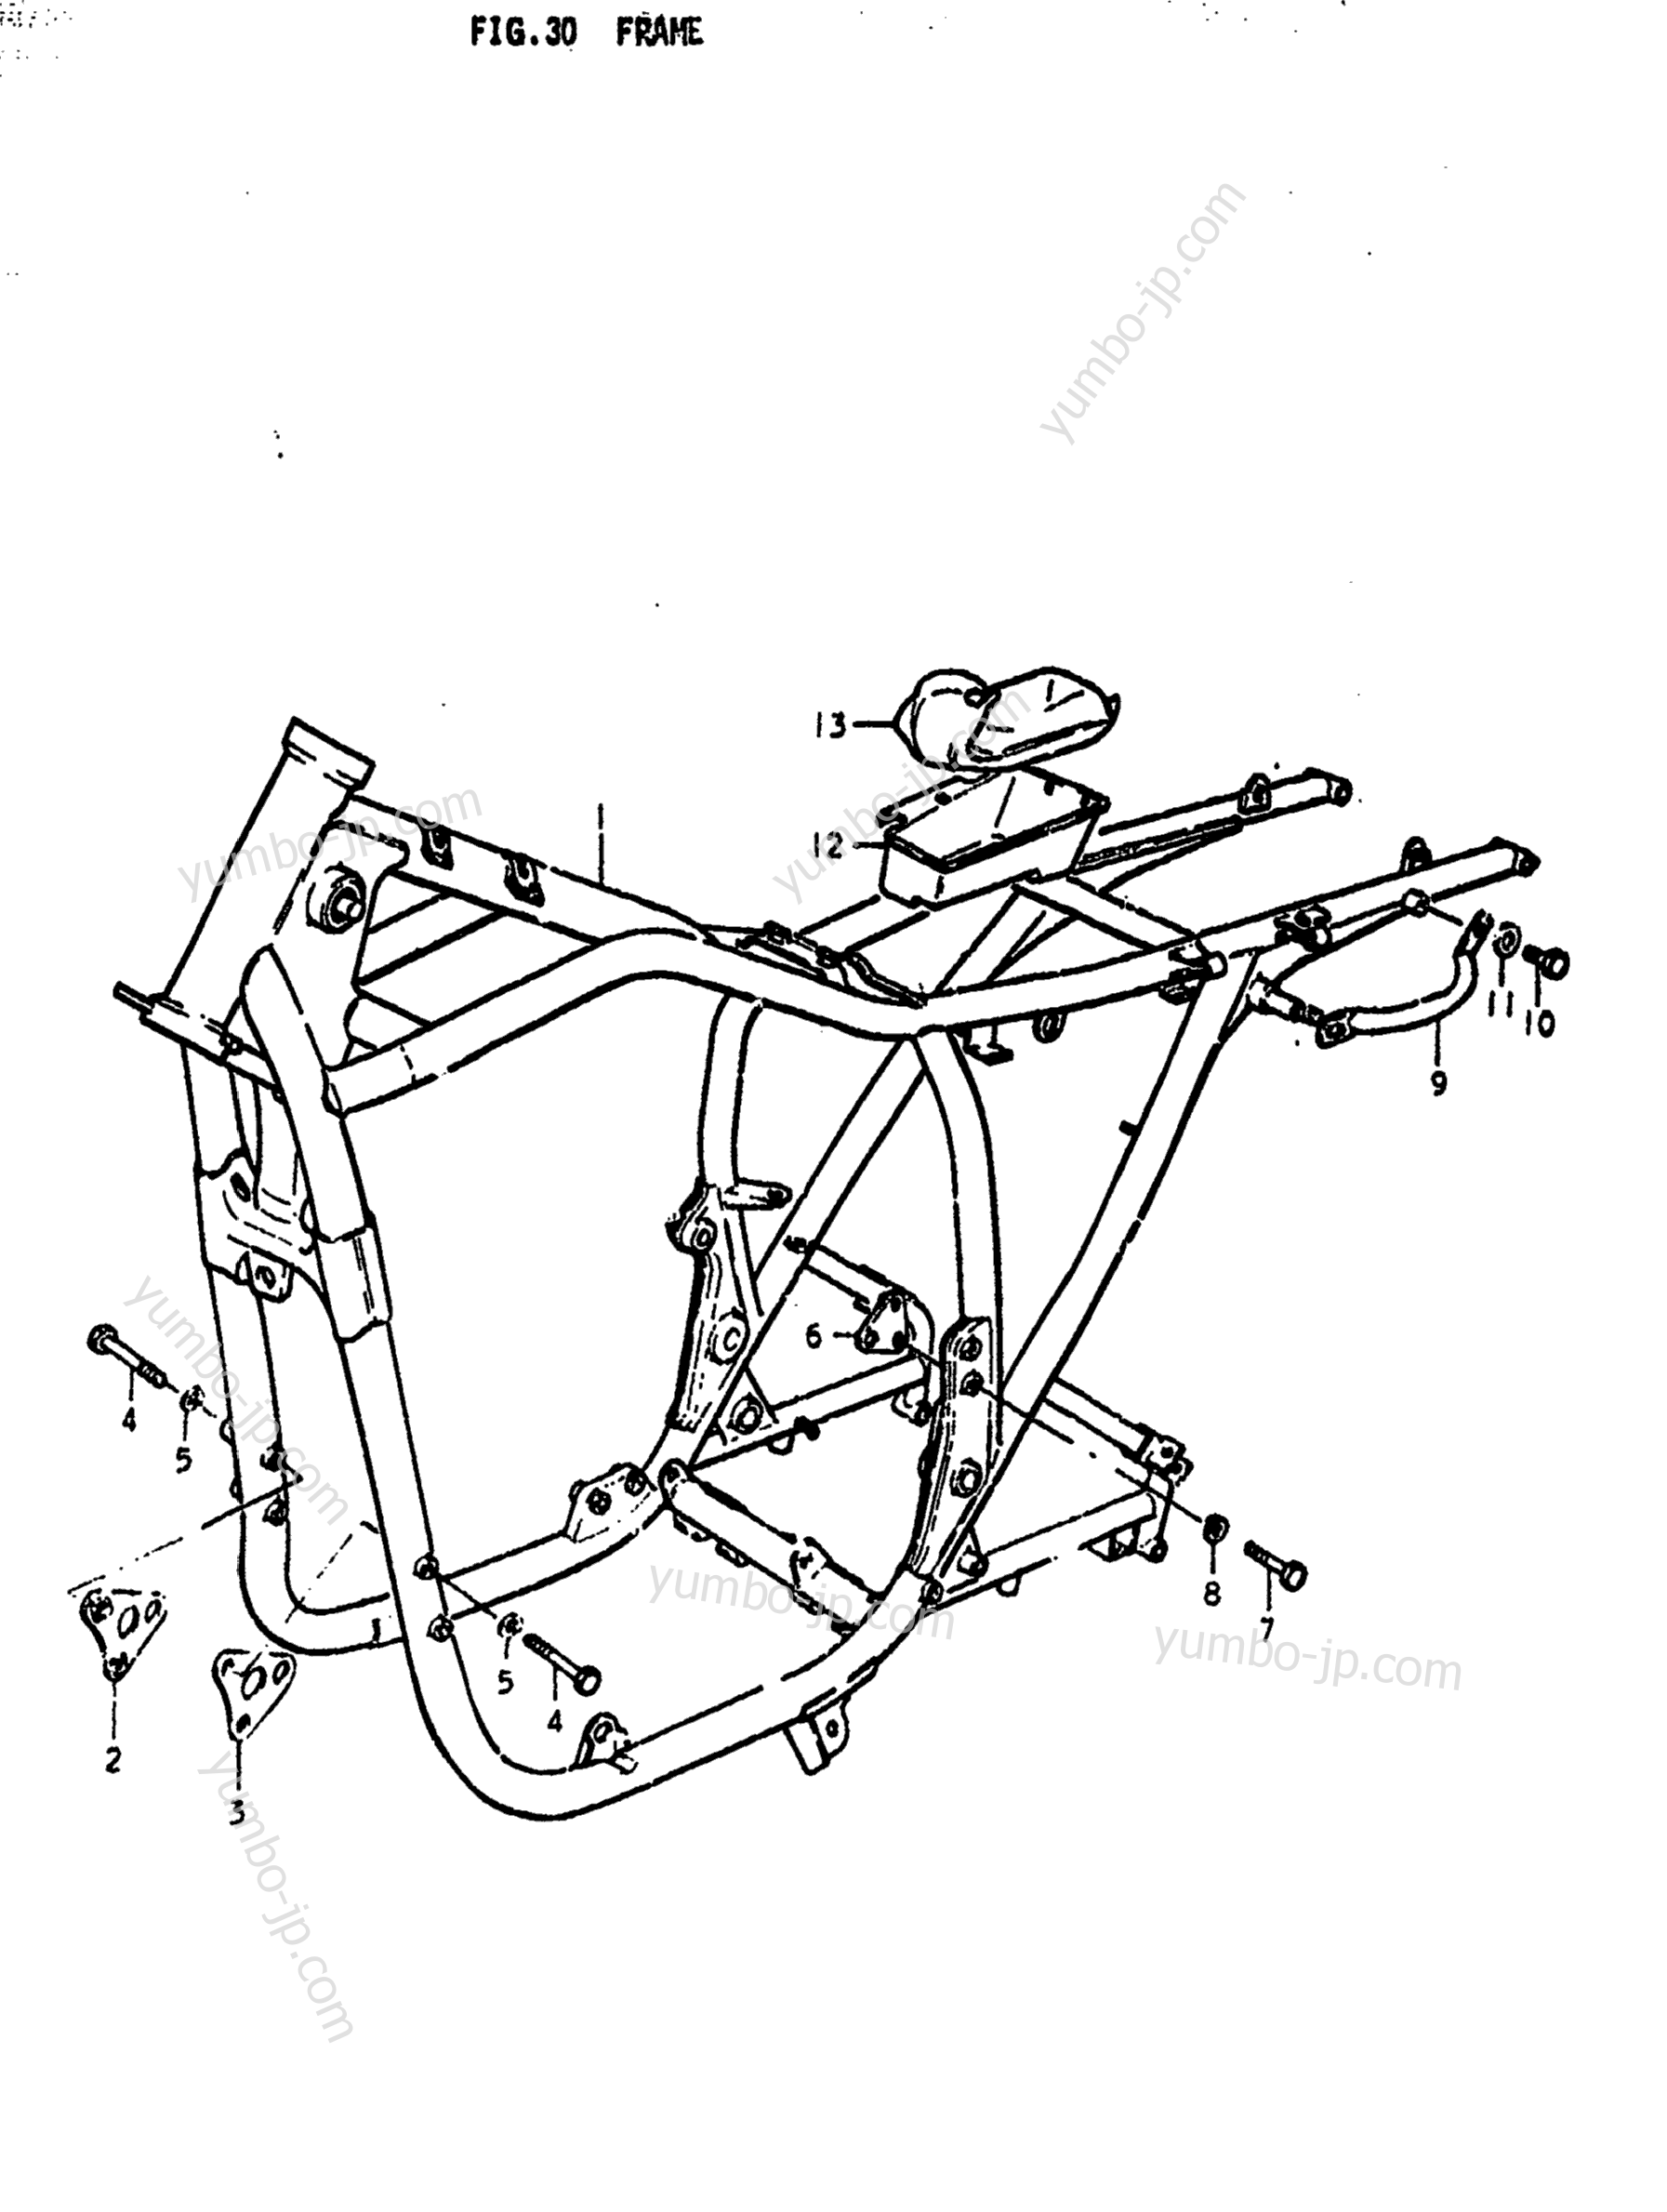 FRAME for motorcycles SUZUKI GS425-E 1979 year